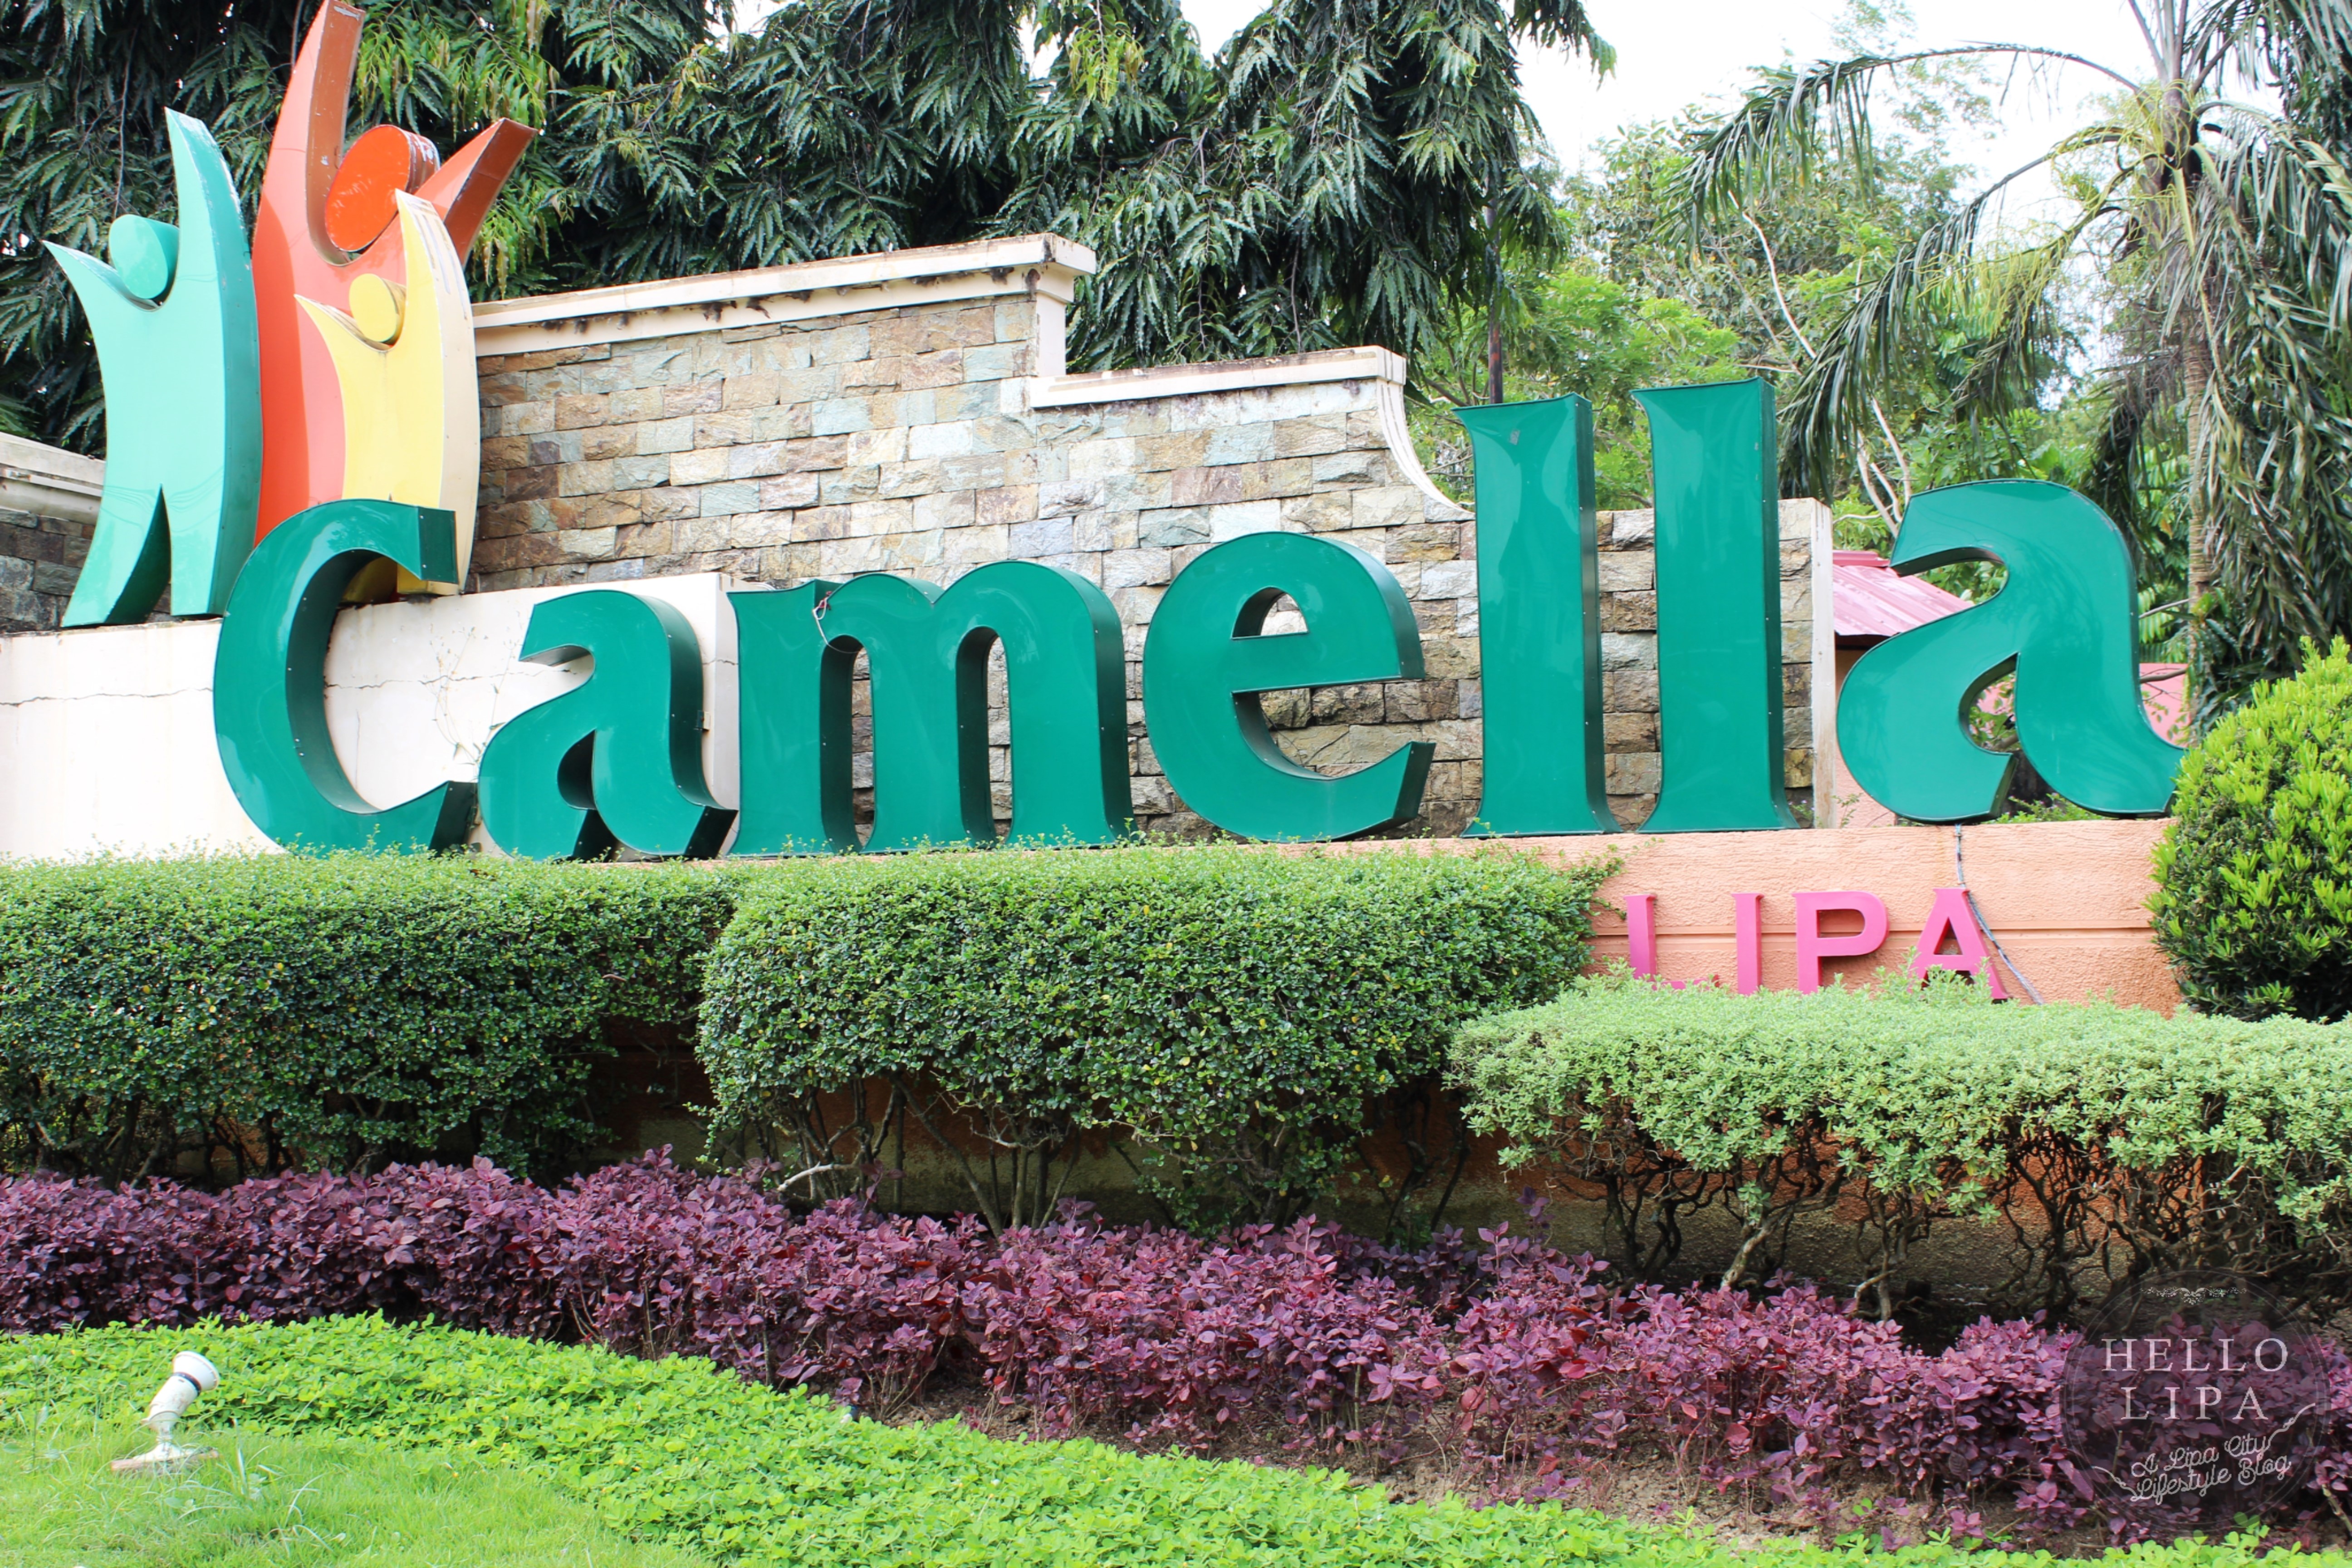 Camella Homes Lipa: Offering You an Investment that Grows that can be Your Dream House Too